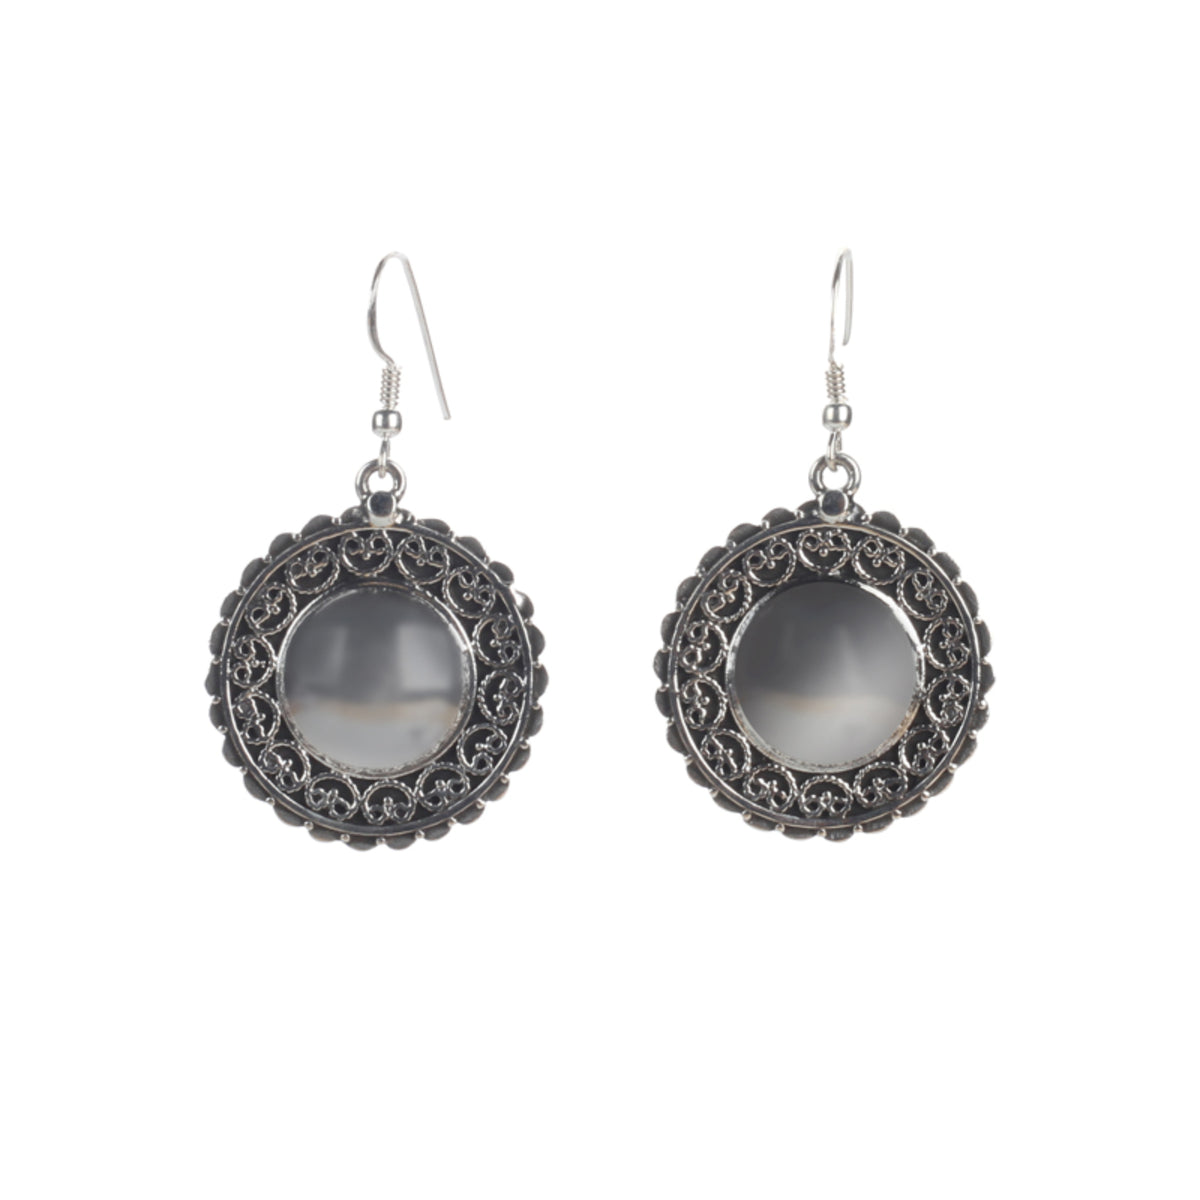 Round Silver Earring